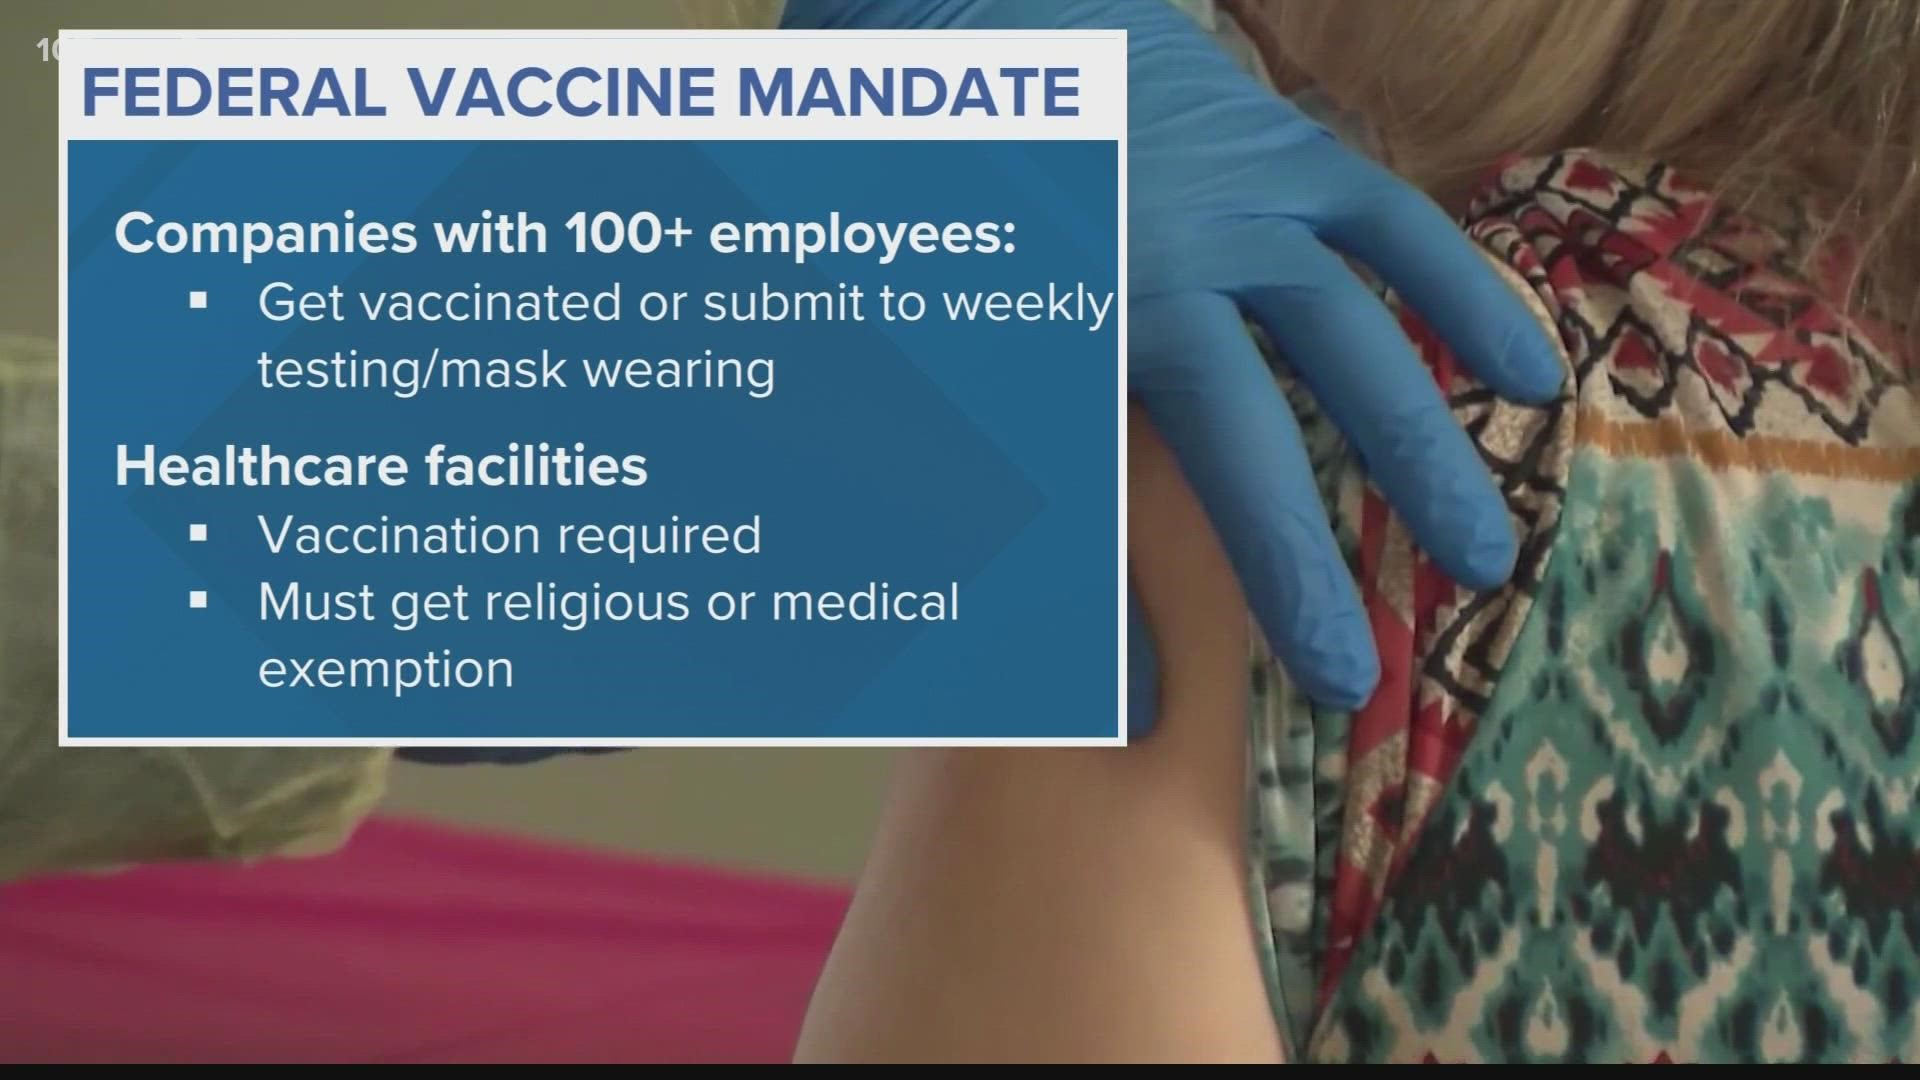 About 4 million federal workers are to be vaccinated by Nov. 22 under Biden's executive order.